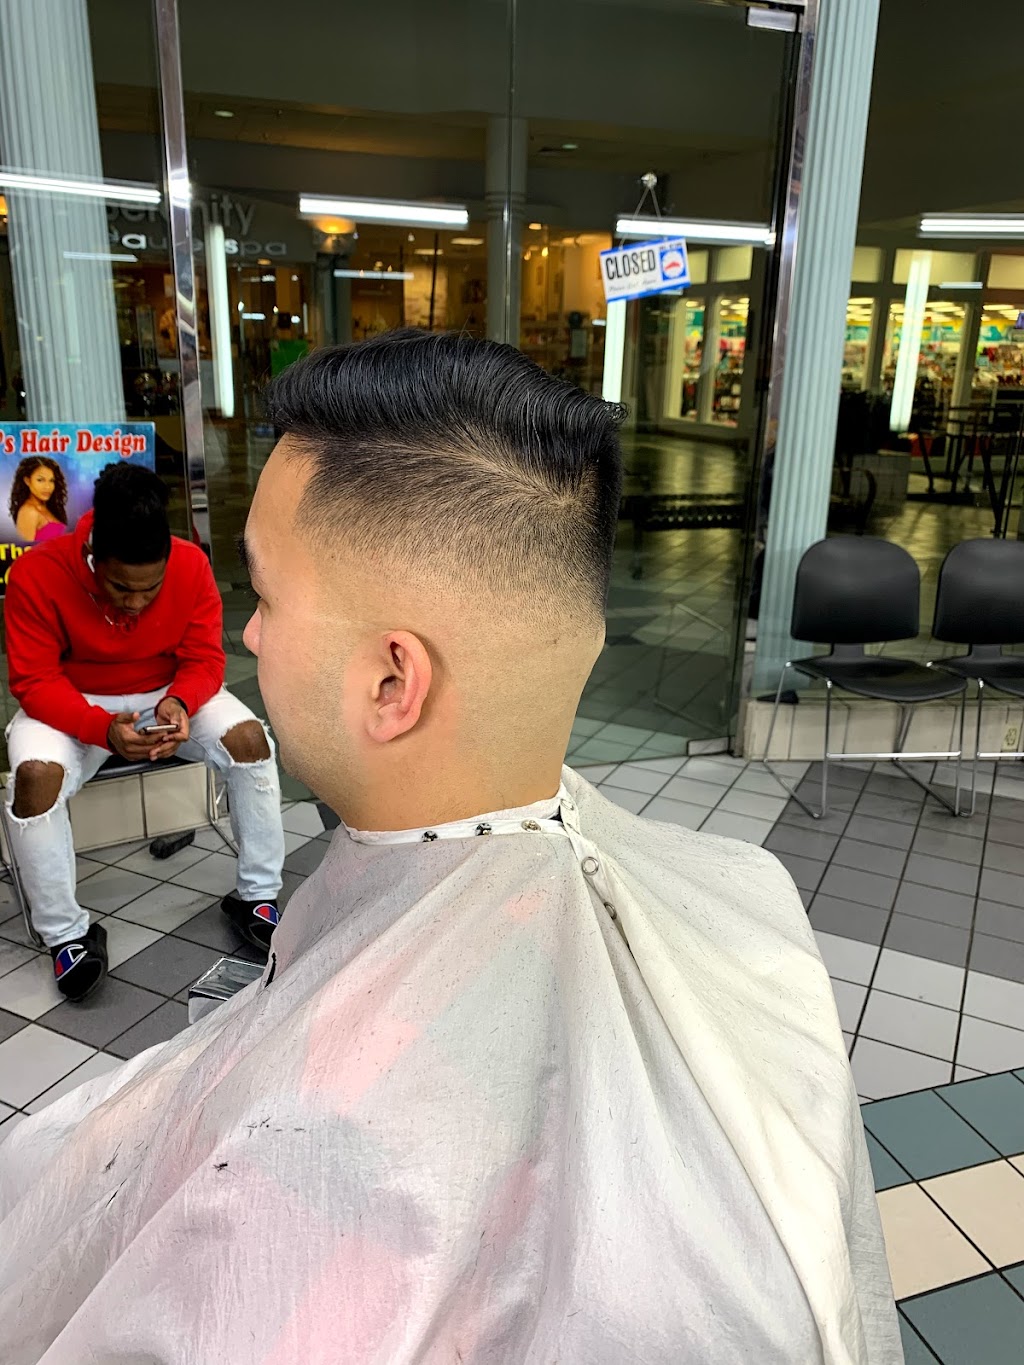 Keon Moore Barber | Photo 6 of 10 | Address: 2453 Irving Mall Dr, Irving, TX 75062, USA | Phone: (469) 994-9338